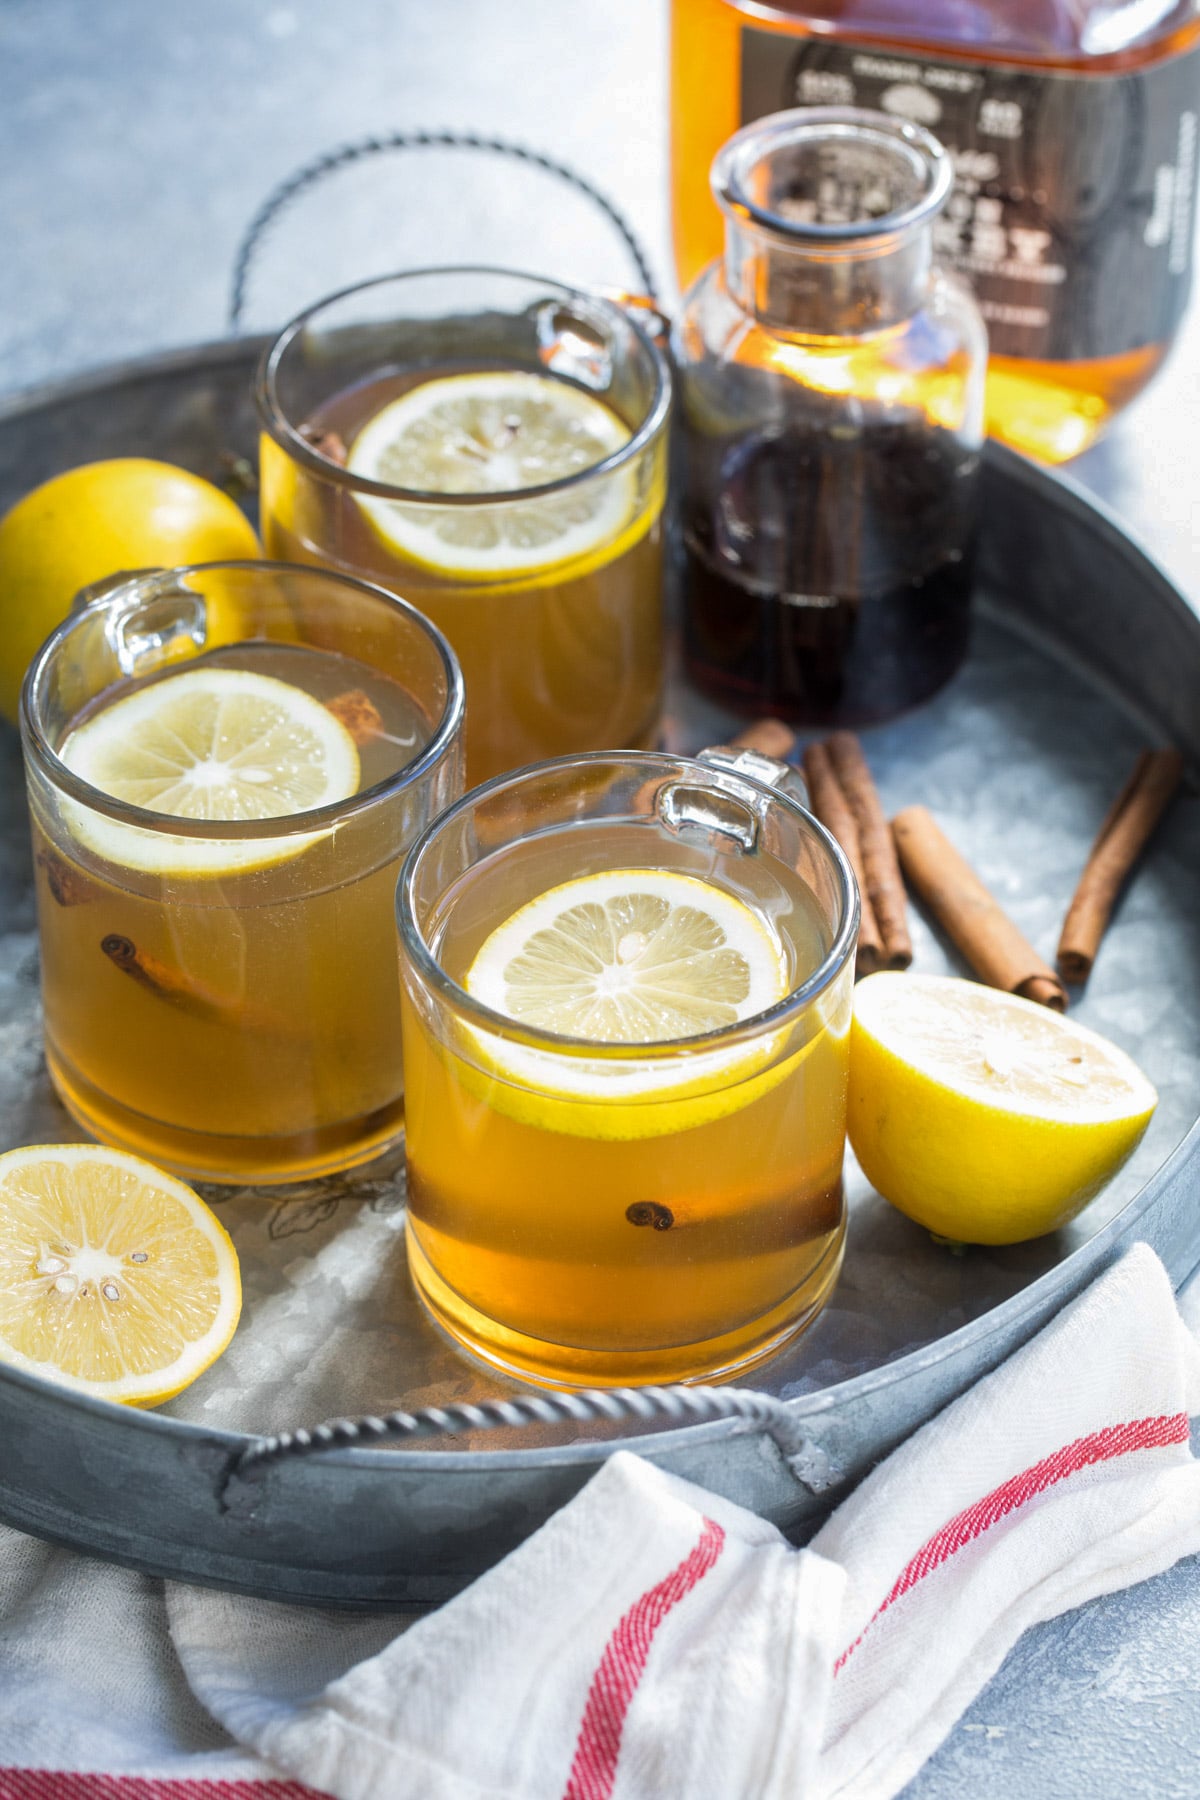 Hot toddies in clear glass mugs on a silver serving tray.